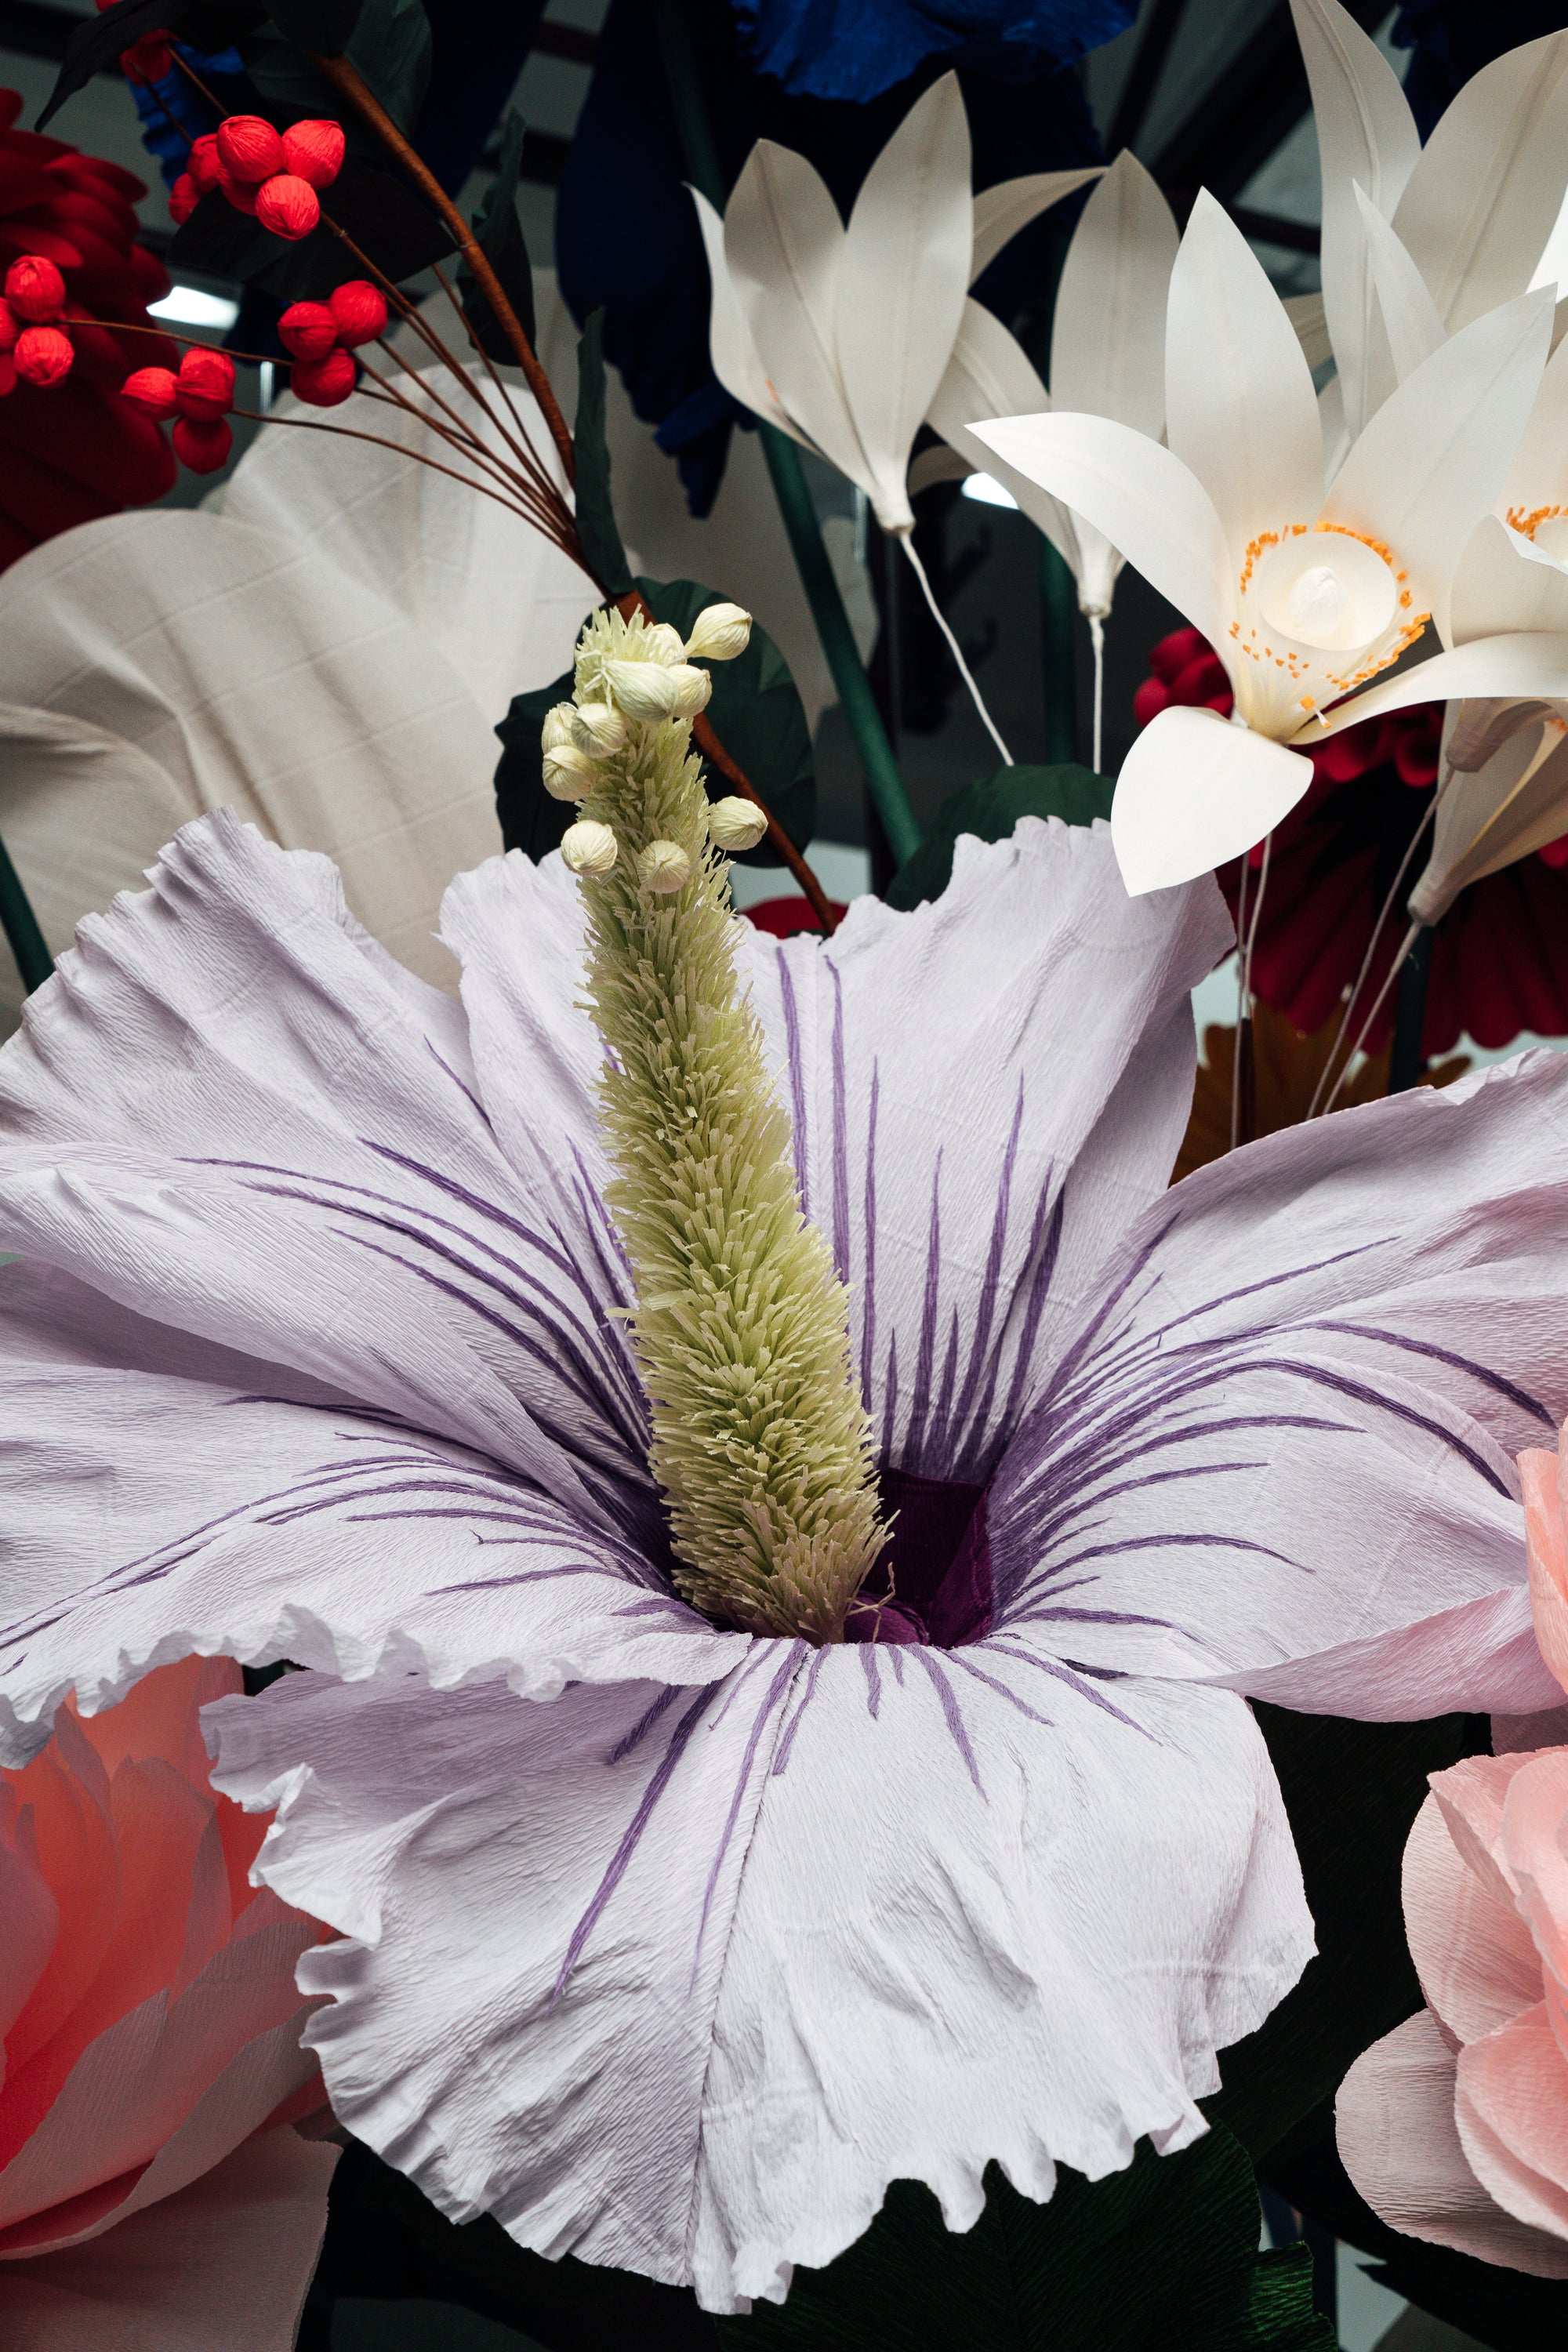 Tangled stems and vibrant blooms in the paper flower installation